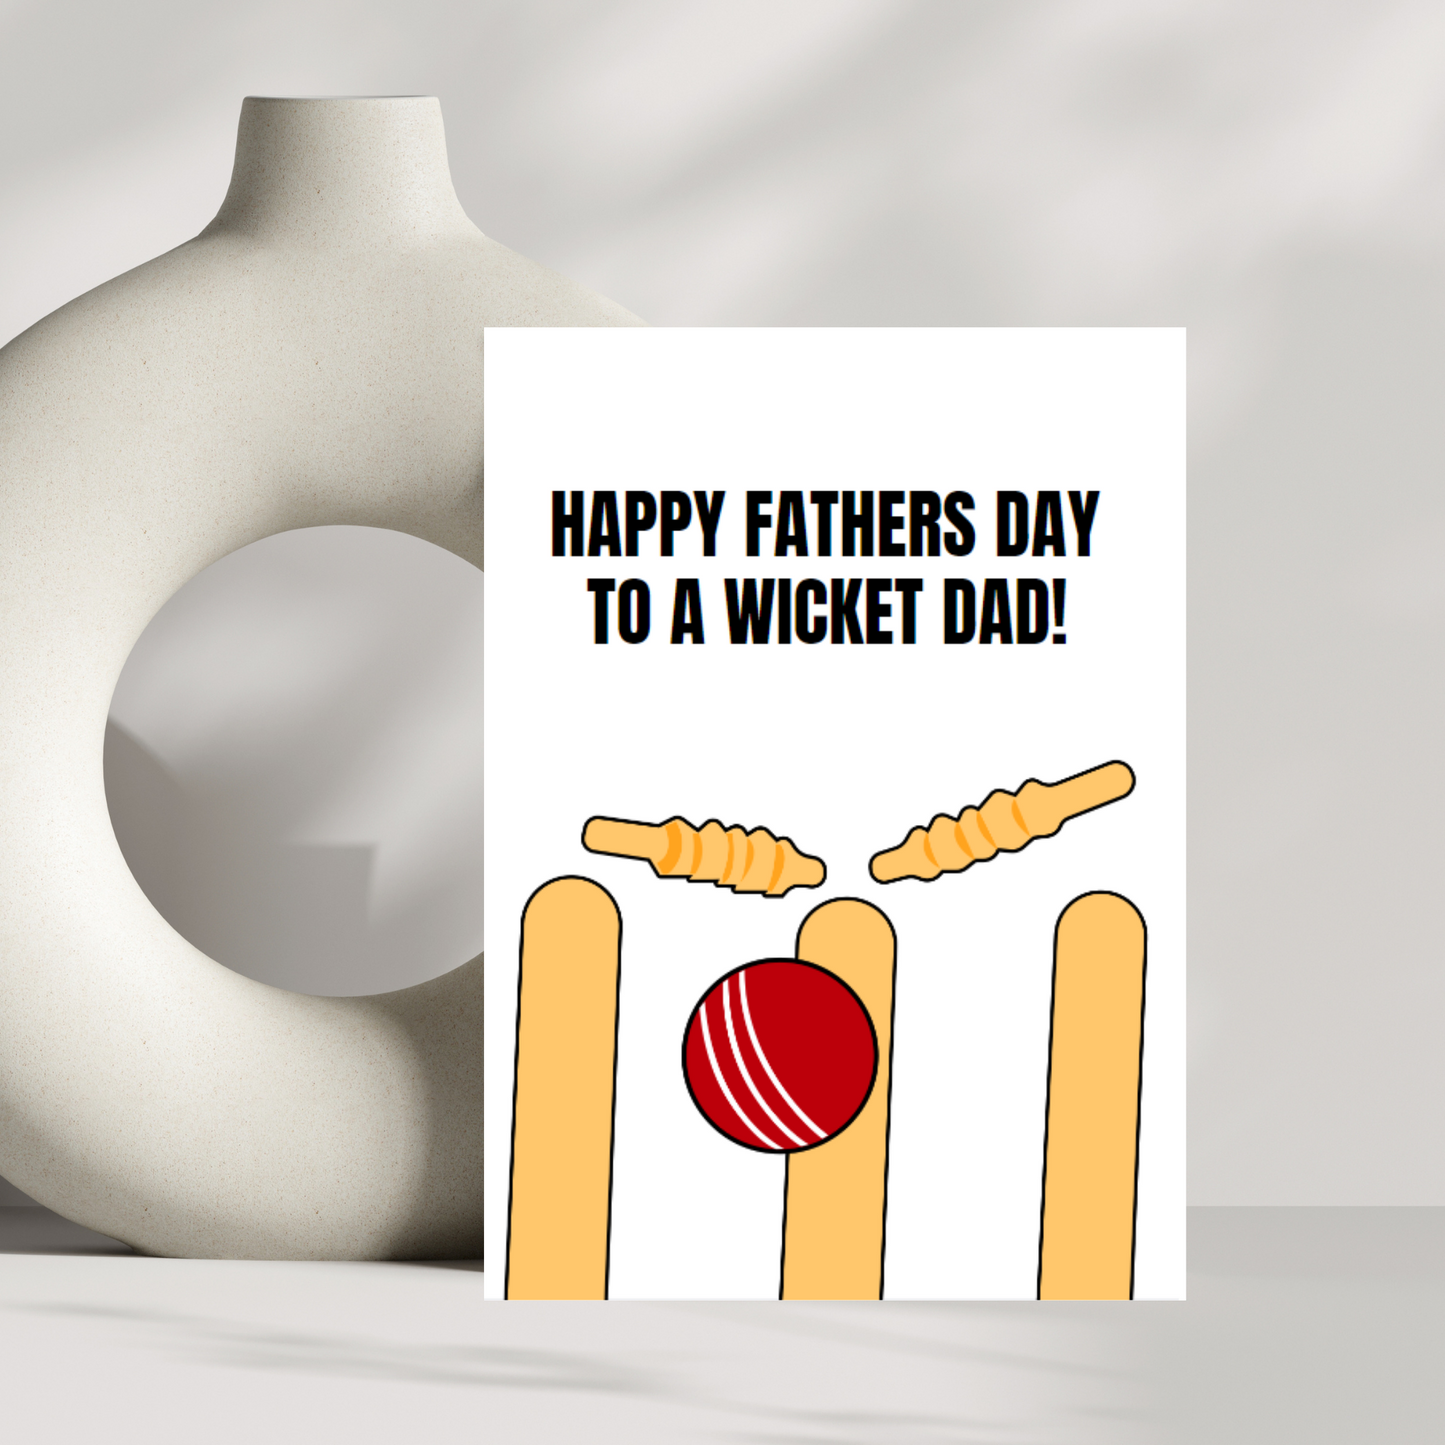 Happy fathers day to a wicket dad! - fathers day card